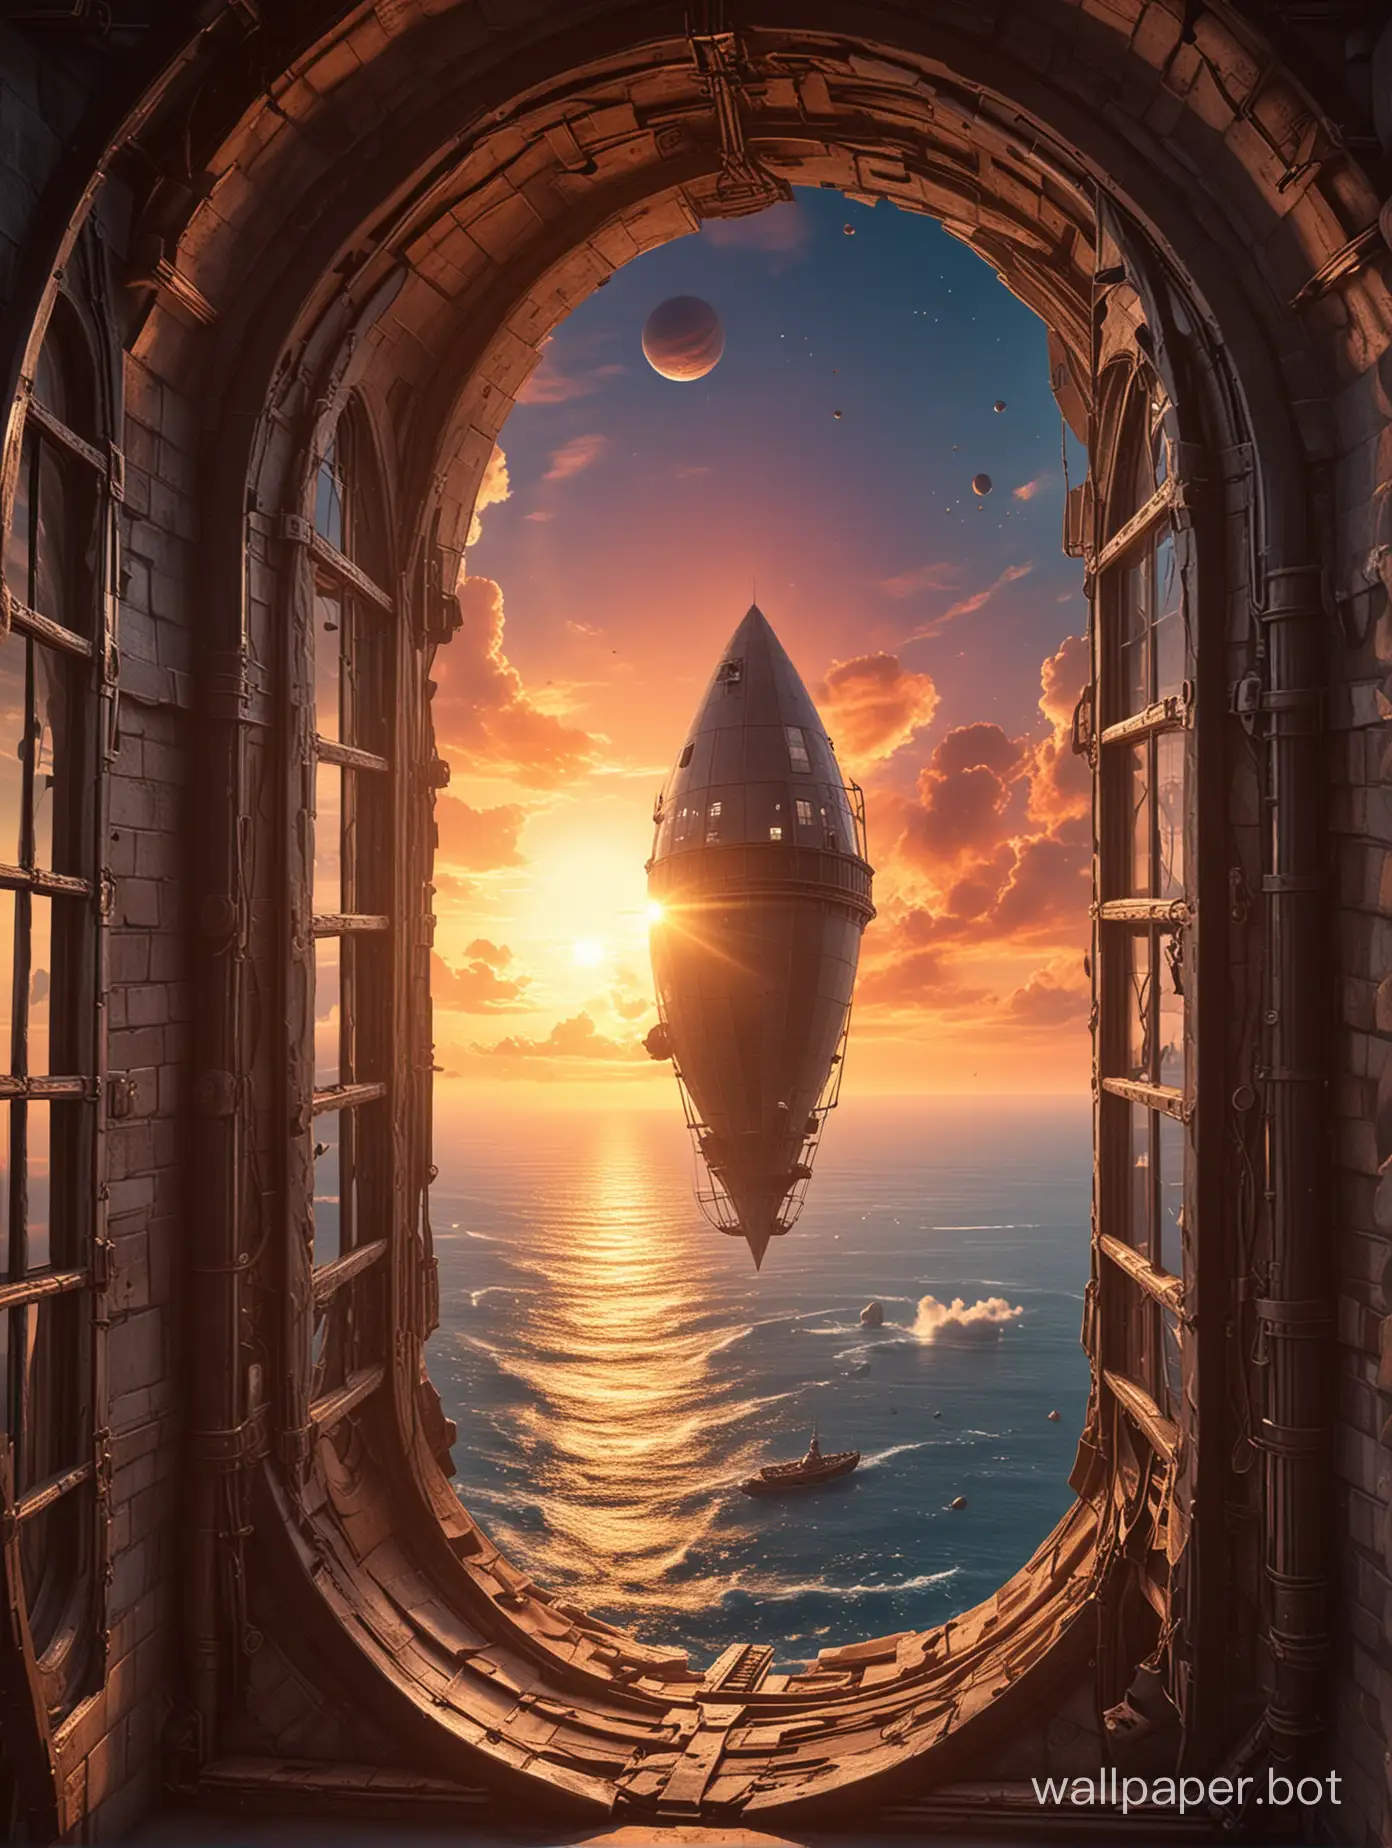 SciFi-Fantasy-Tower-and-Airship-Against-Sunset-Sky